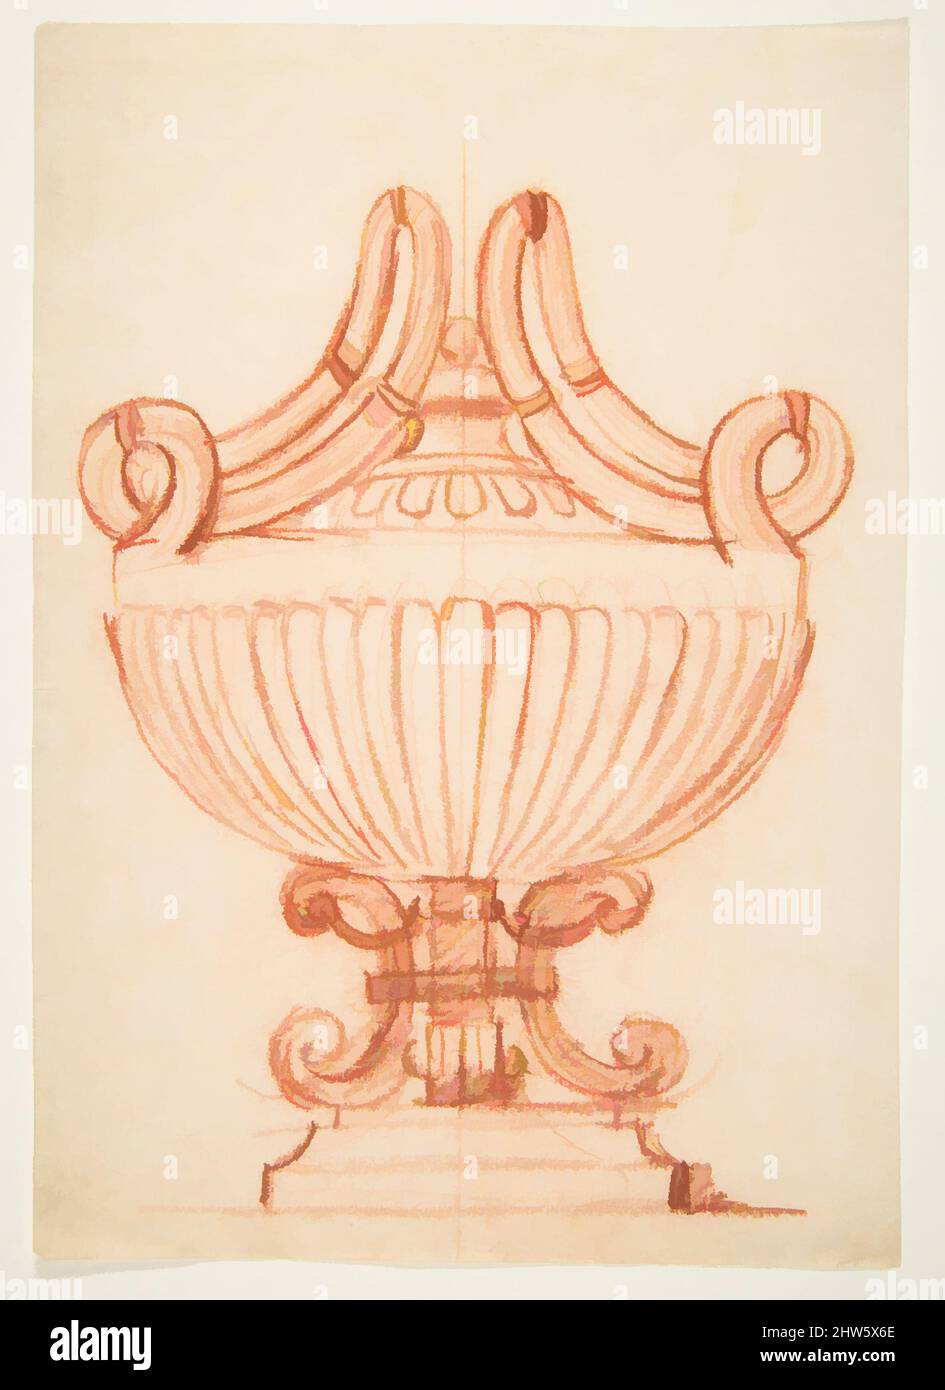 Art inspired by Design for a Covered Vase, 18th century, Red chalk, sheet: 7 1/8 x 5 3/8 in. (18.1 x 13.7 cm), Attributed to Anonymous, French, 18th century, Classic works modernized by Artotop with a splash of modernity. Shapes, color and value, eye-catching visual impact on art. Emotions through freedom of artworks in a contemporary way. A timeless message pursuing a wildly creative new direction. Artists turning to the digital medium and creating the Artotop NFT Stock Photo